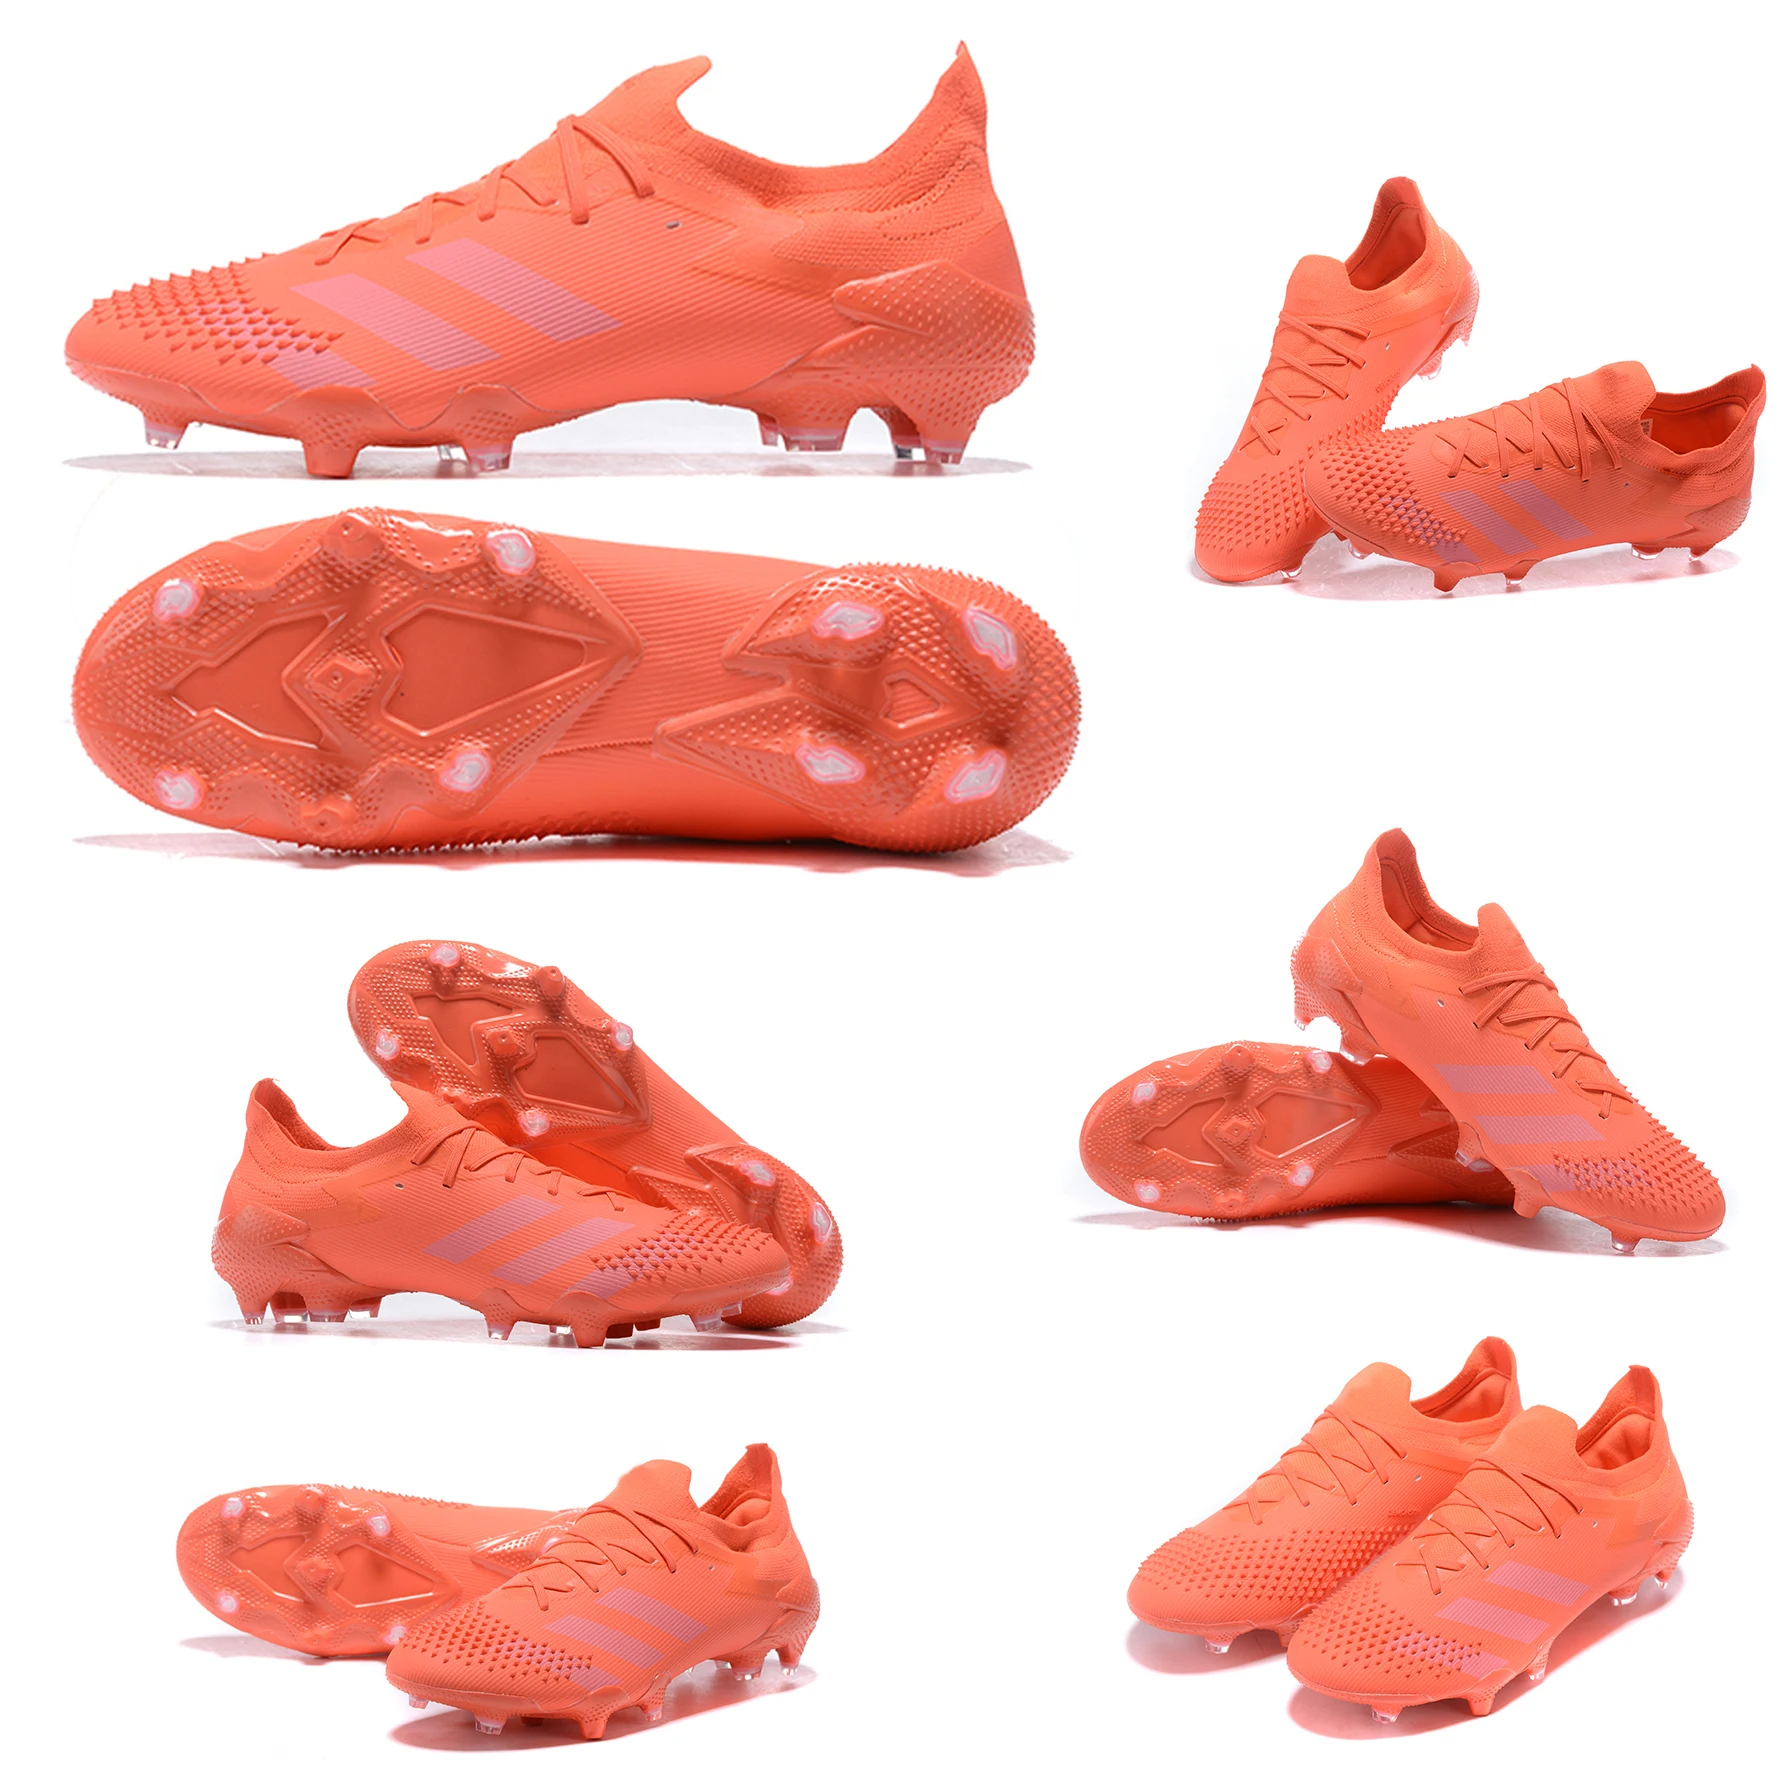 

Predator mutator 20.1 low fg size39-45 - Core black / White / active red FG nail soccer shoes football shoes